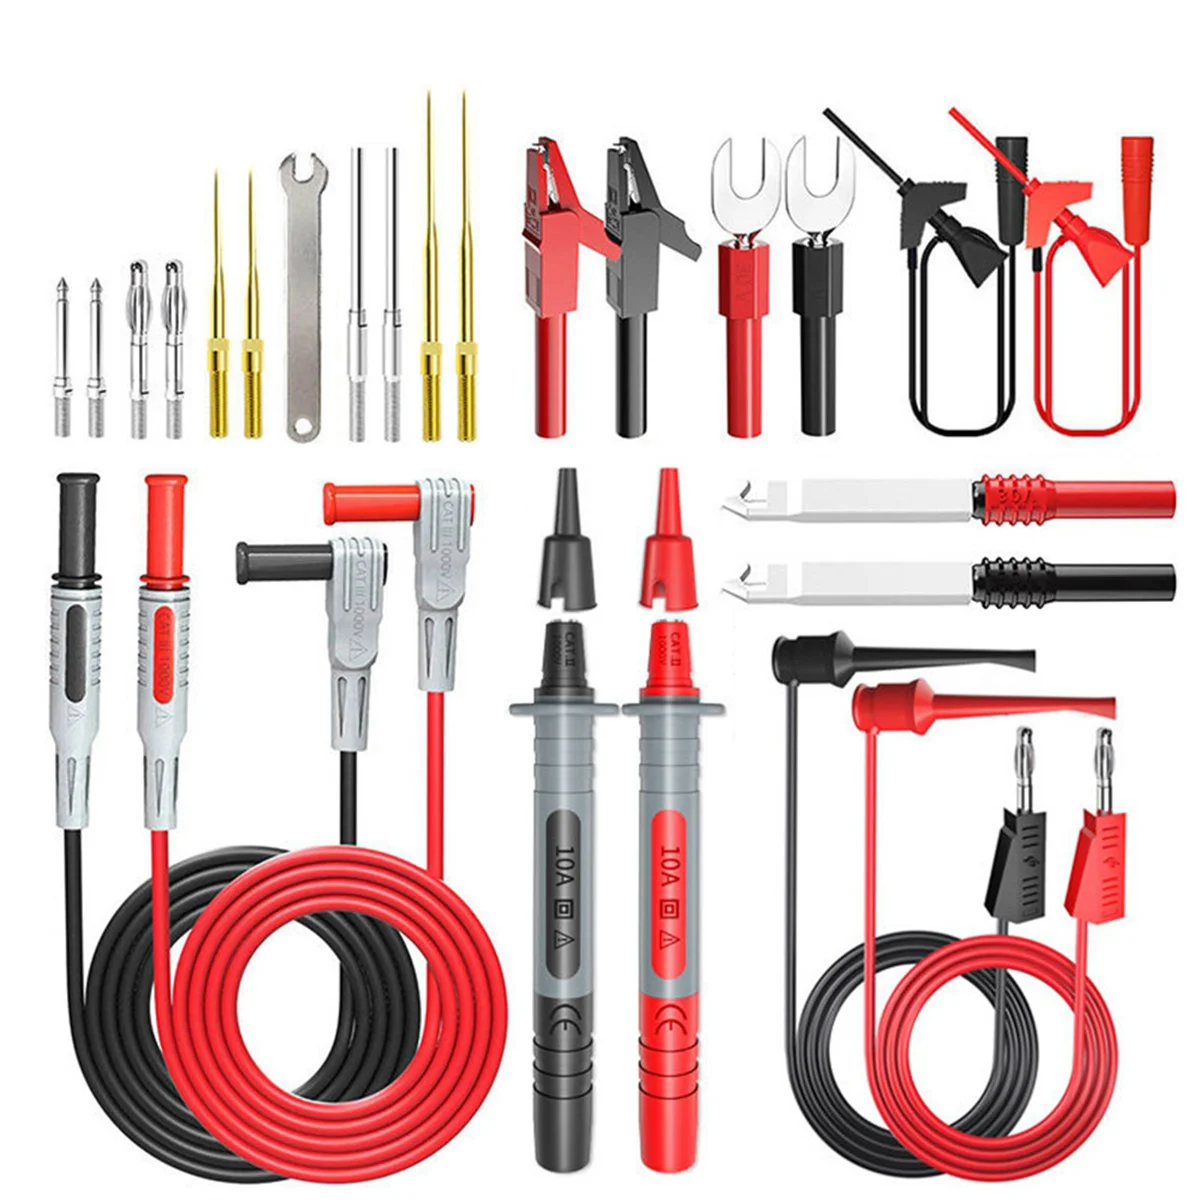 

P1308D 25PCS Multimeter Silicone Test Lead Kit with Replaceable Needle Spanner Alligator Clip 4mm Banana Plug